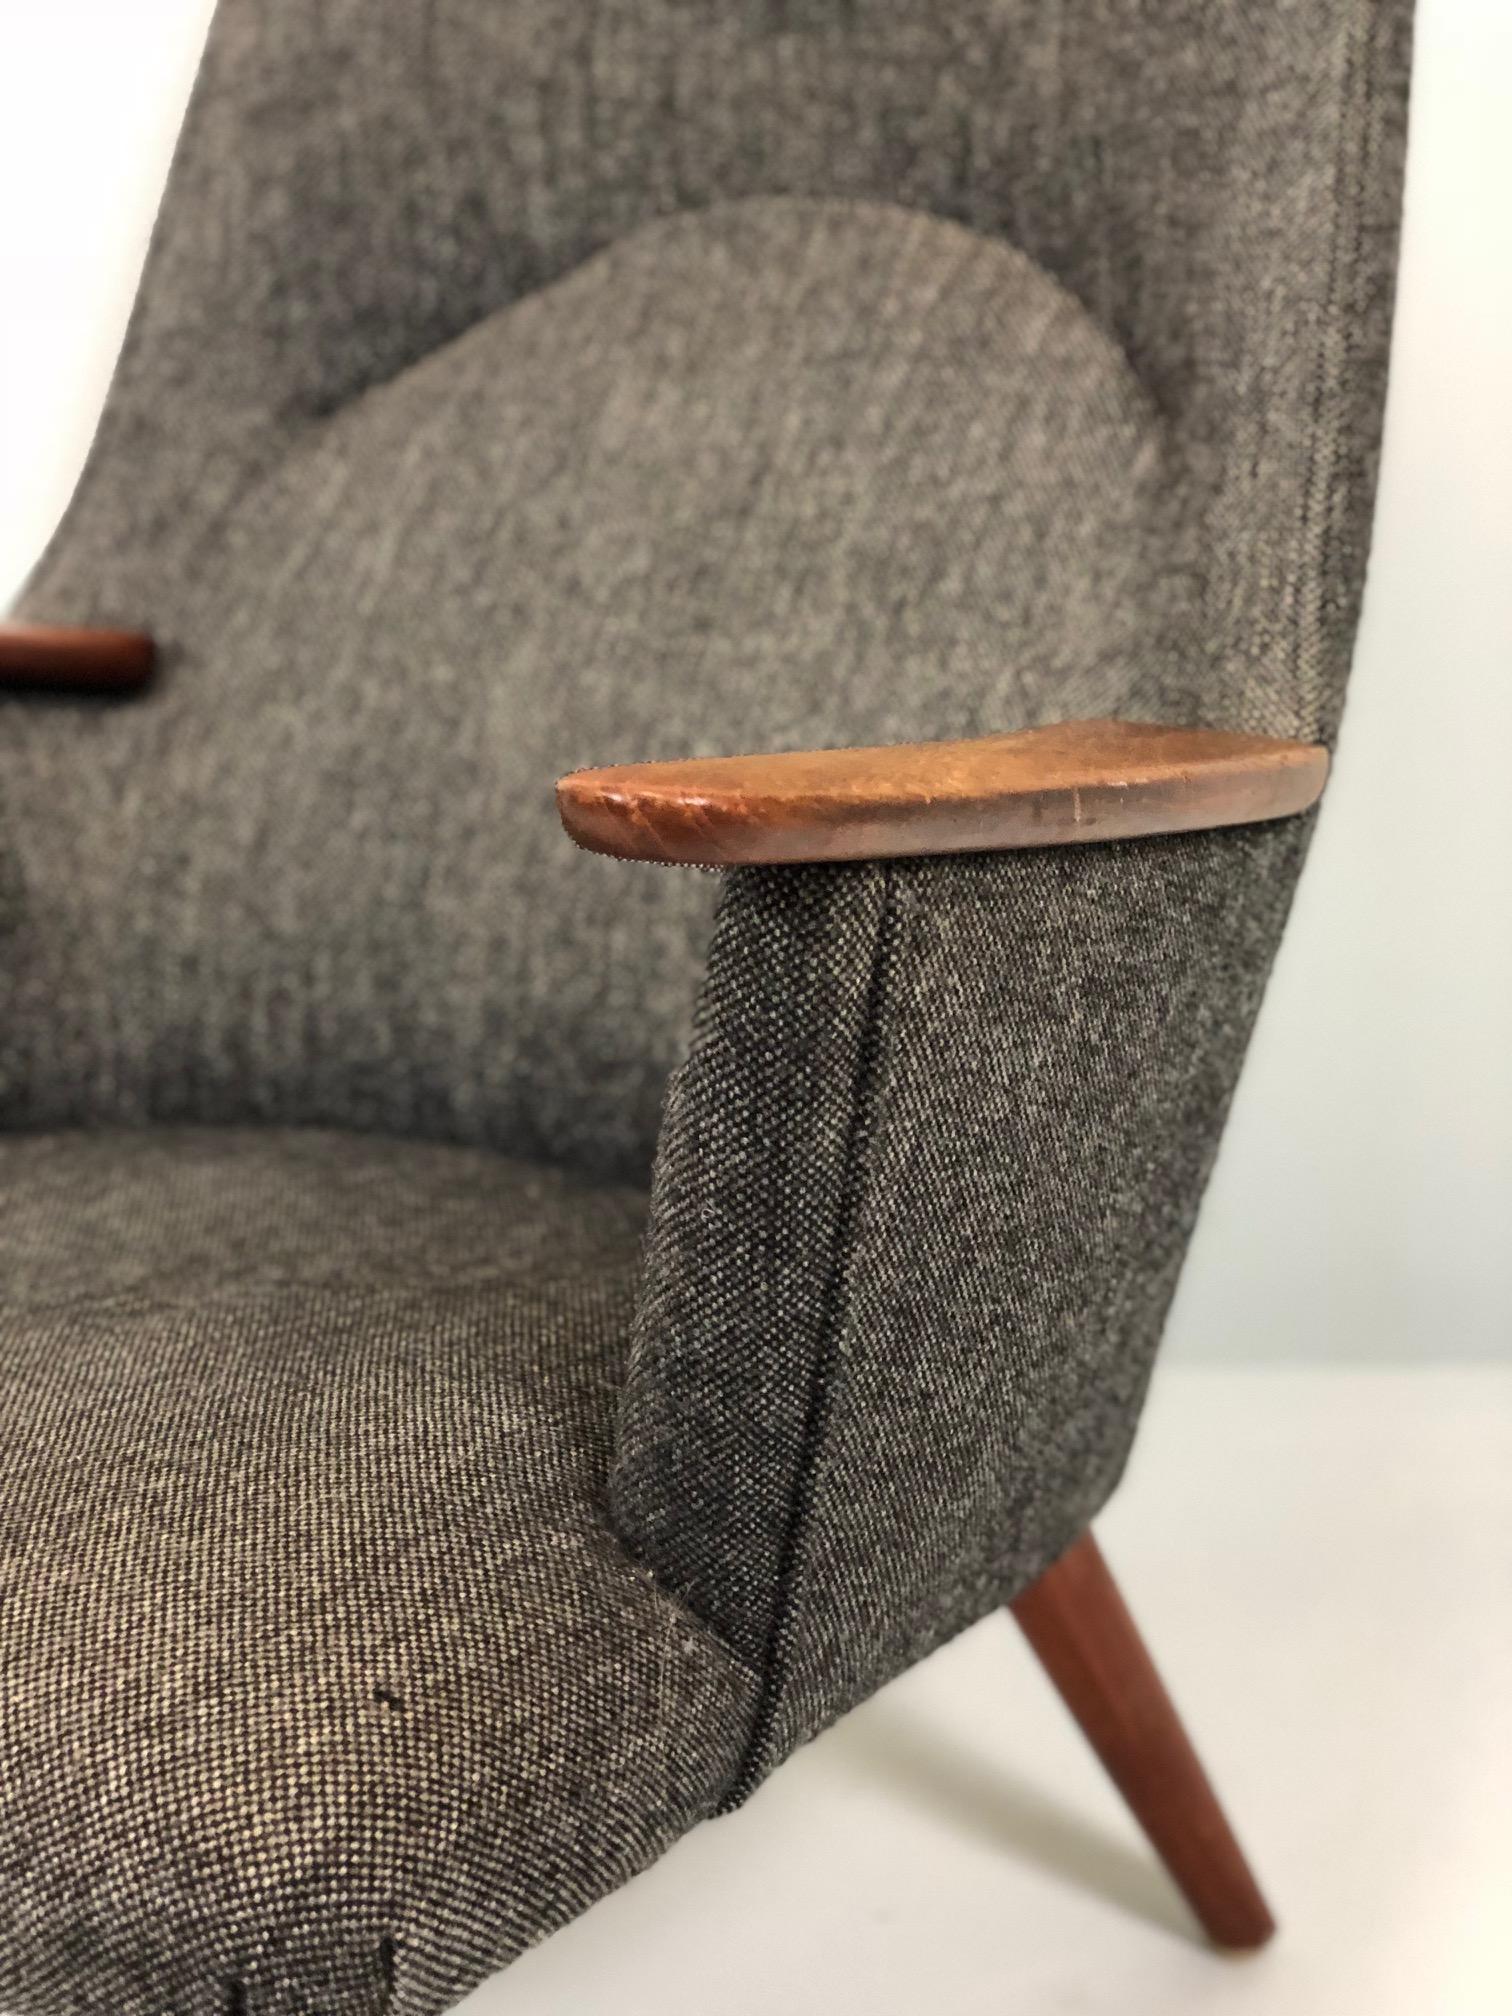 Hans Wegner AP-27 lounge chair designed in 1954 and produced by A. P. Stolen.
This sculptural high back armchair is very comfortable and is in original Vintage condition. Teak arm pads and legs. It has an additional headrest.